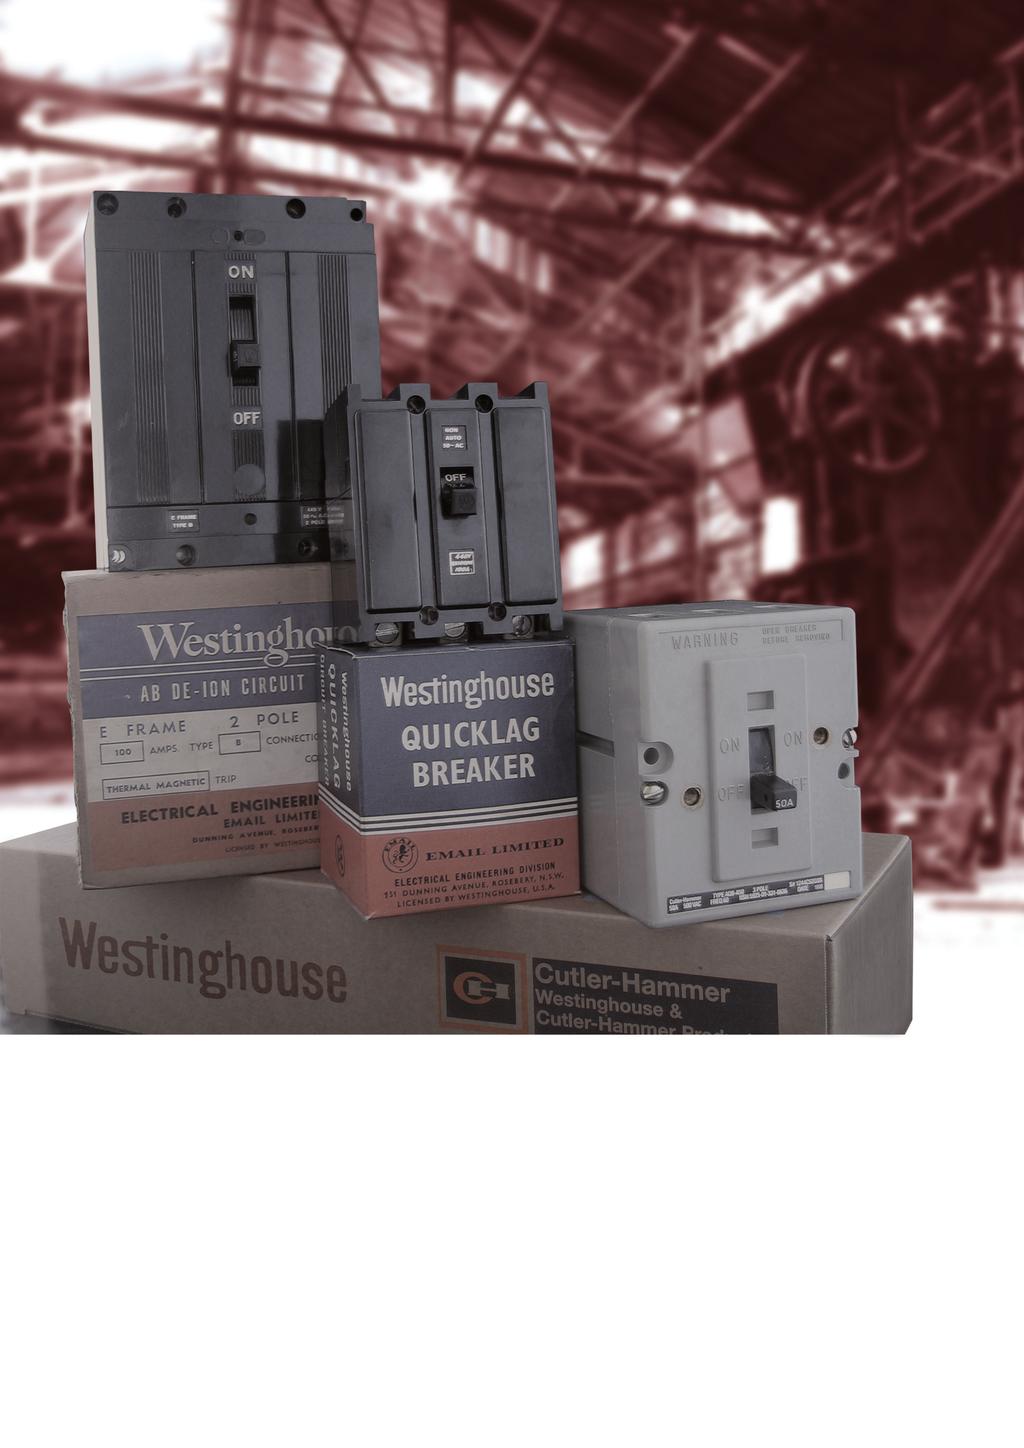 Maintaining Our Commitment Email, Westinghouse, Cutler Hammer, MEM; some of the most widely used electrical distribution & control products in Australia over